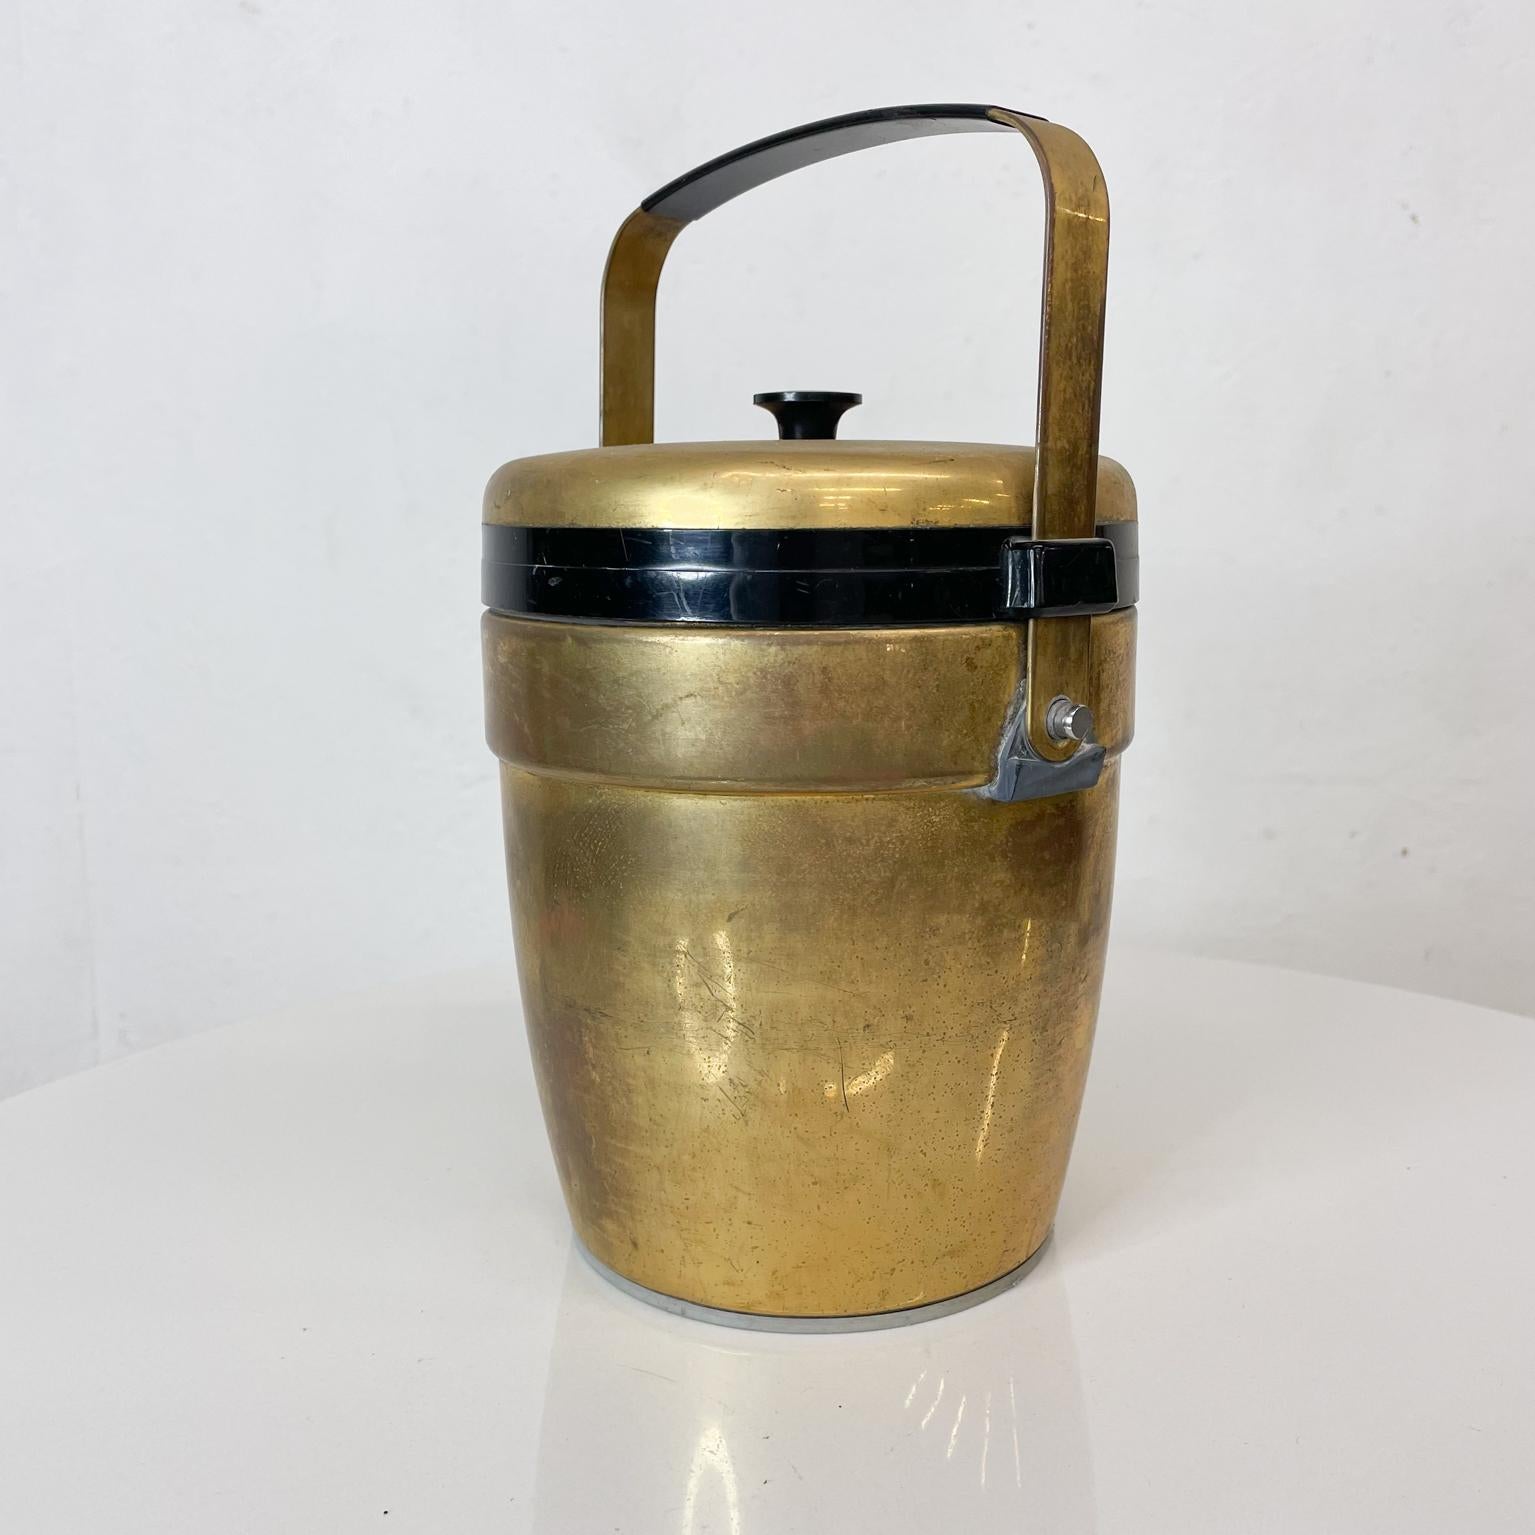 Vintage German Art Deco ice bucket with insert liner made in Germany signed by maker Erhard 1940s
Register is on the base.
Vintage preowned unrestored condition. Presents with dings and scuffs. Wear is visible.
Dimensions: 10 H x 6.75 W x 6